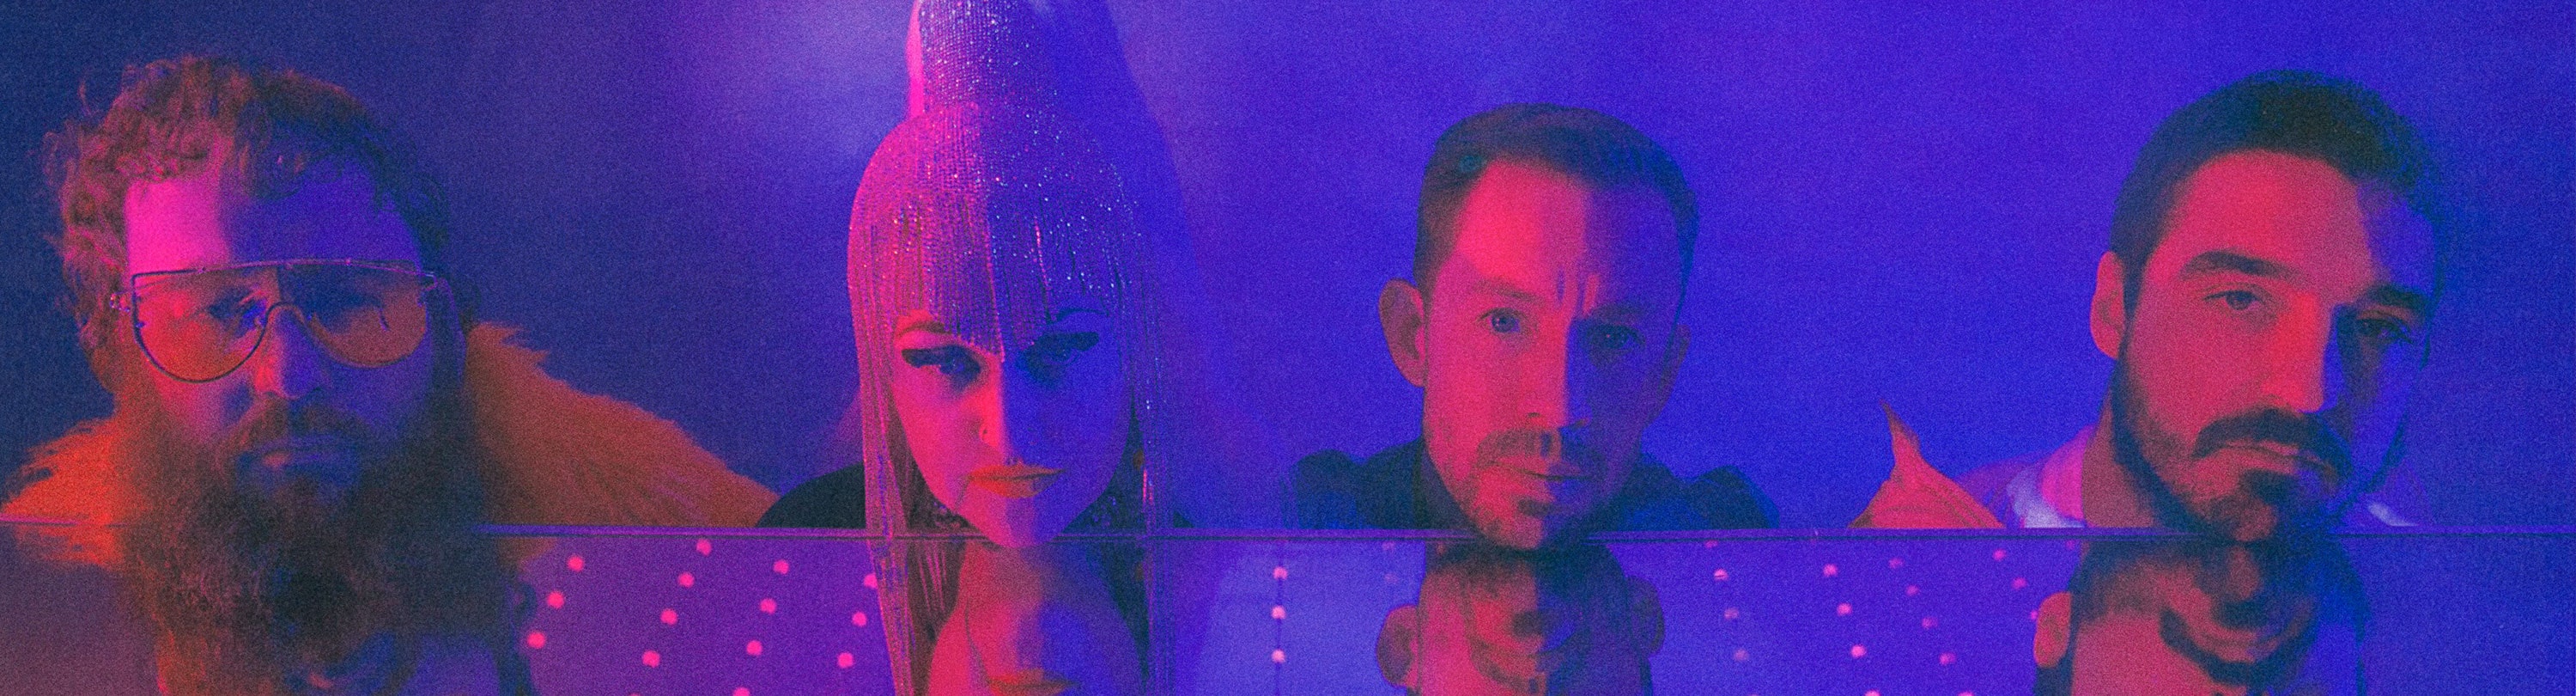 The four members of Hiatus Kaiyote are looking at the camera with the heads resting above a mirror under blue and pink light